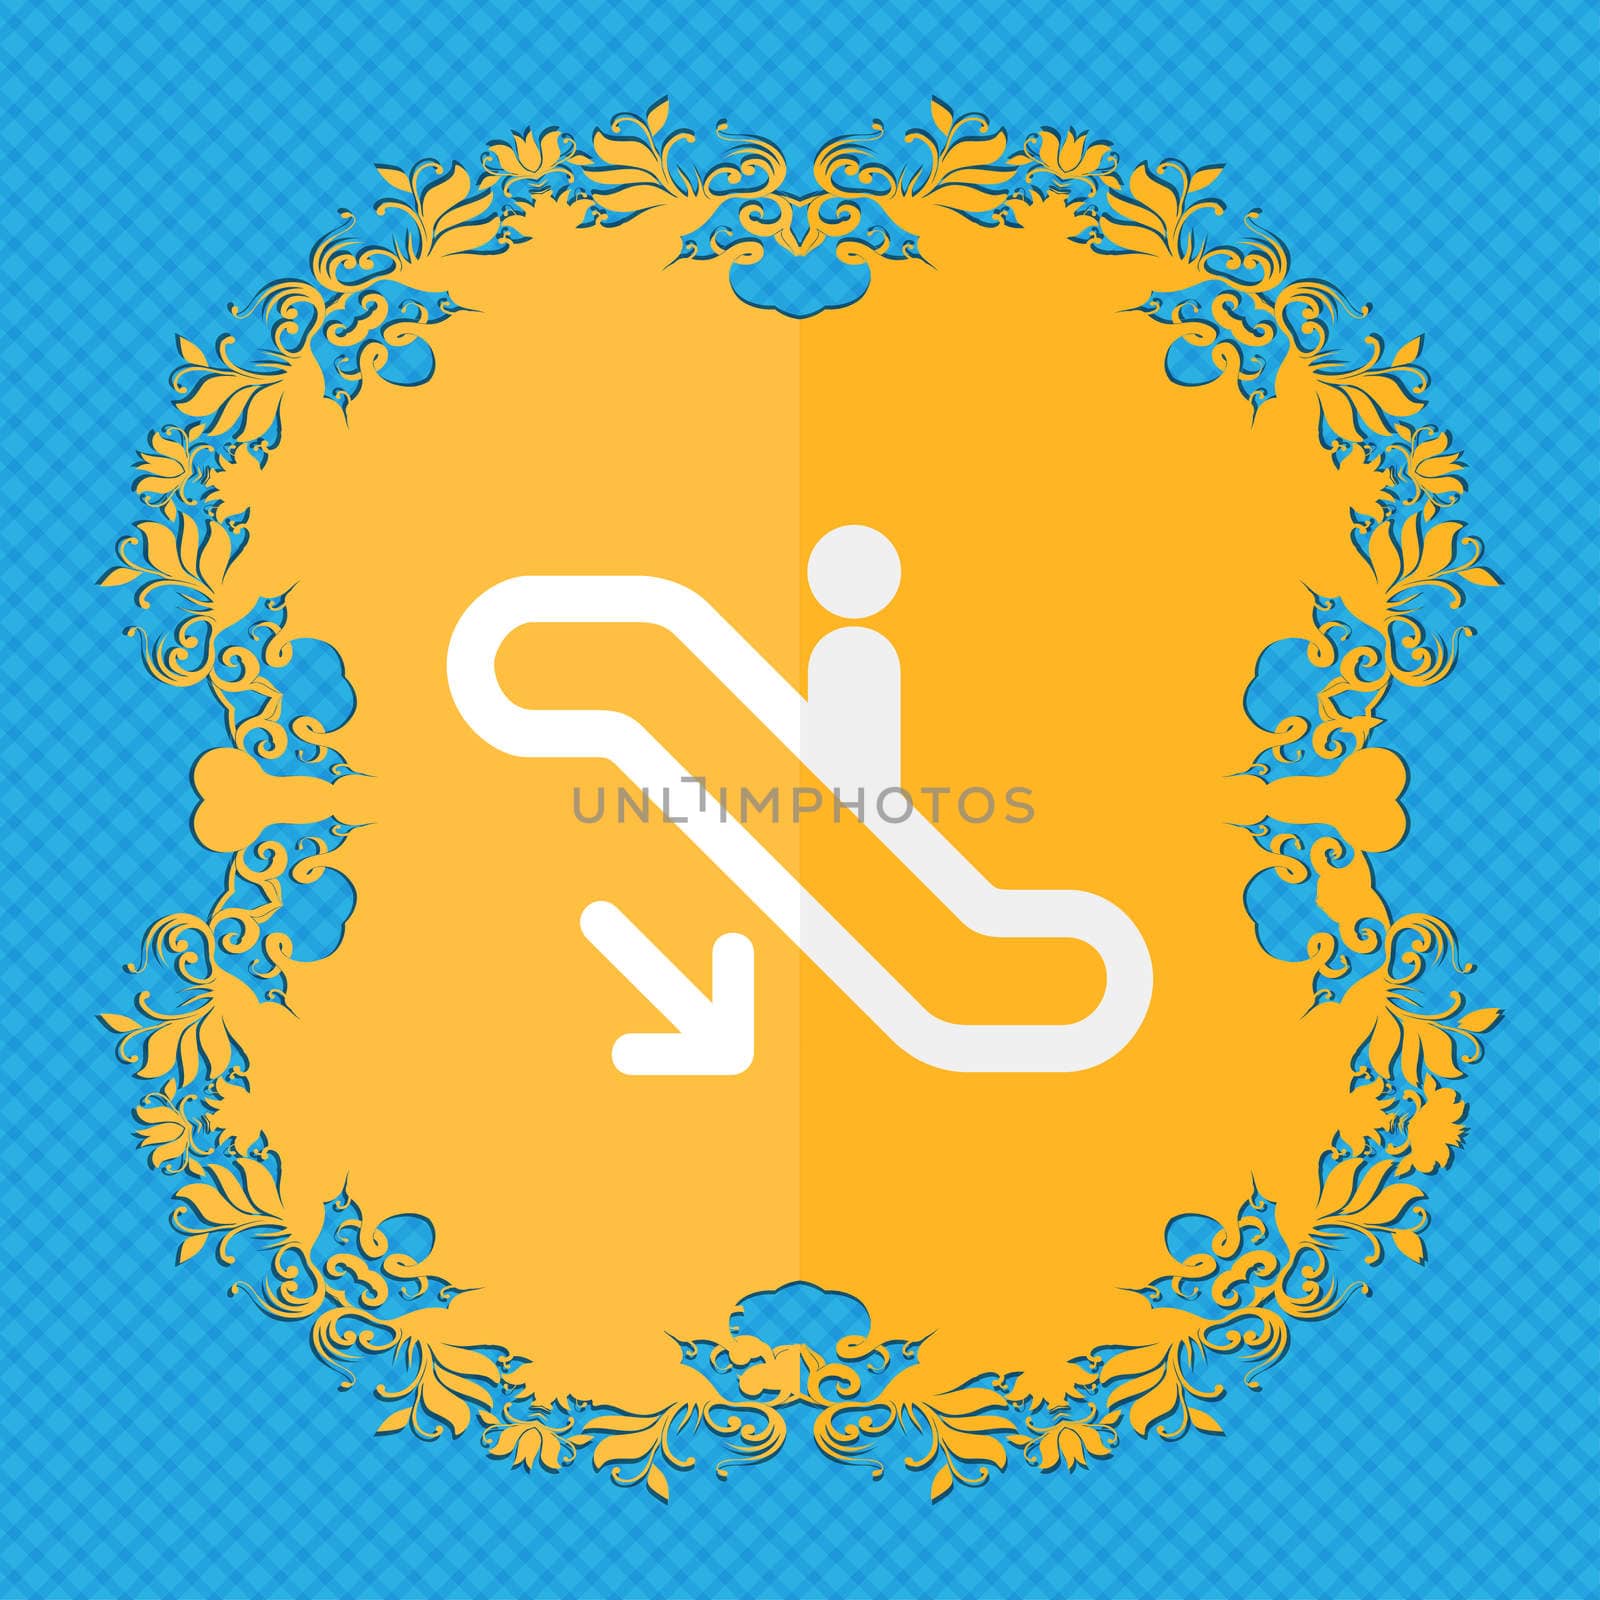 elevator, Escalator, Staircase. Floral flat design on a blue abstract background with place for your text. illustration